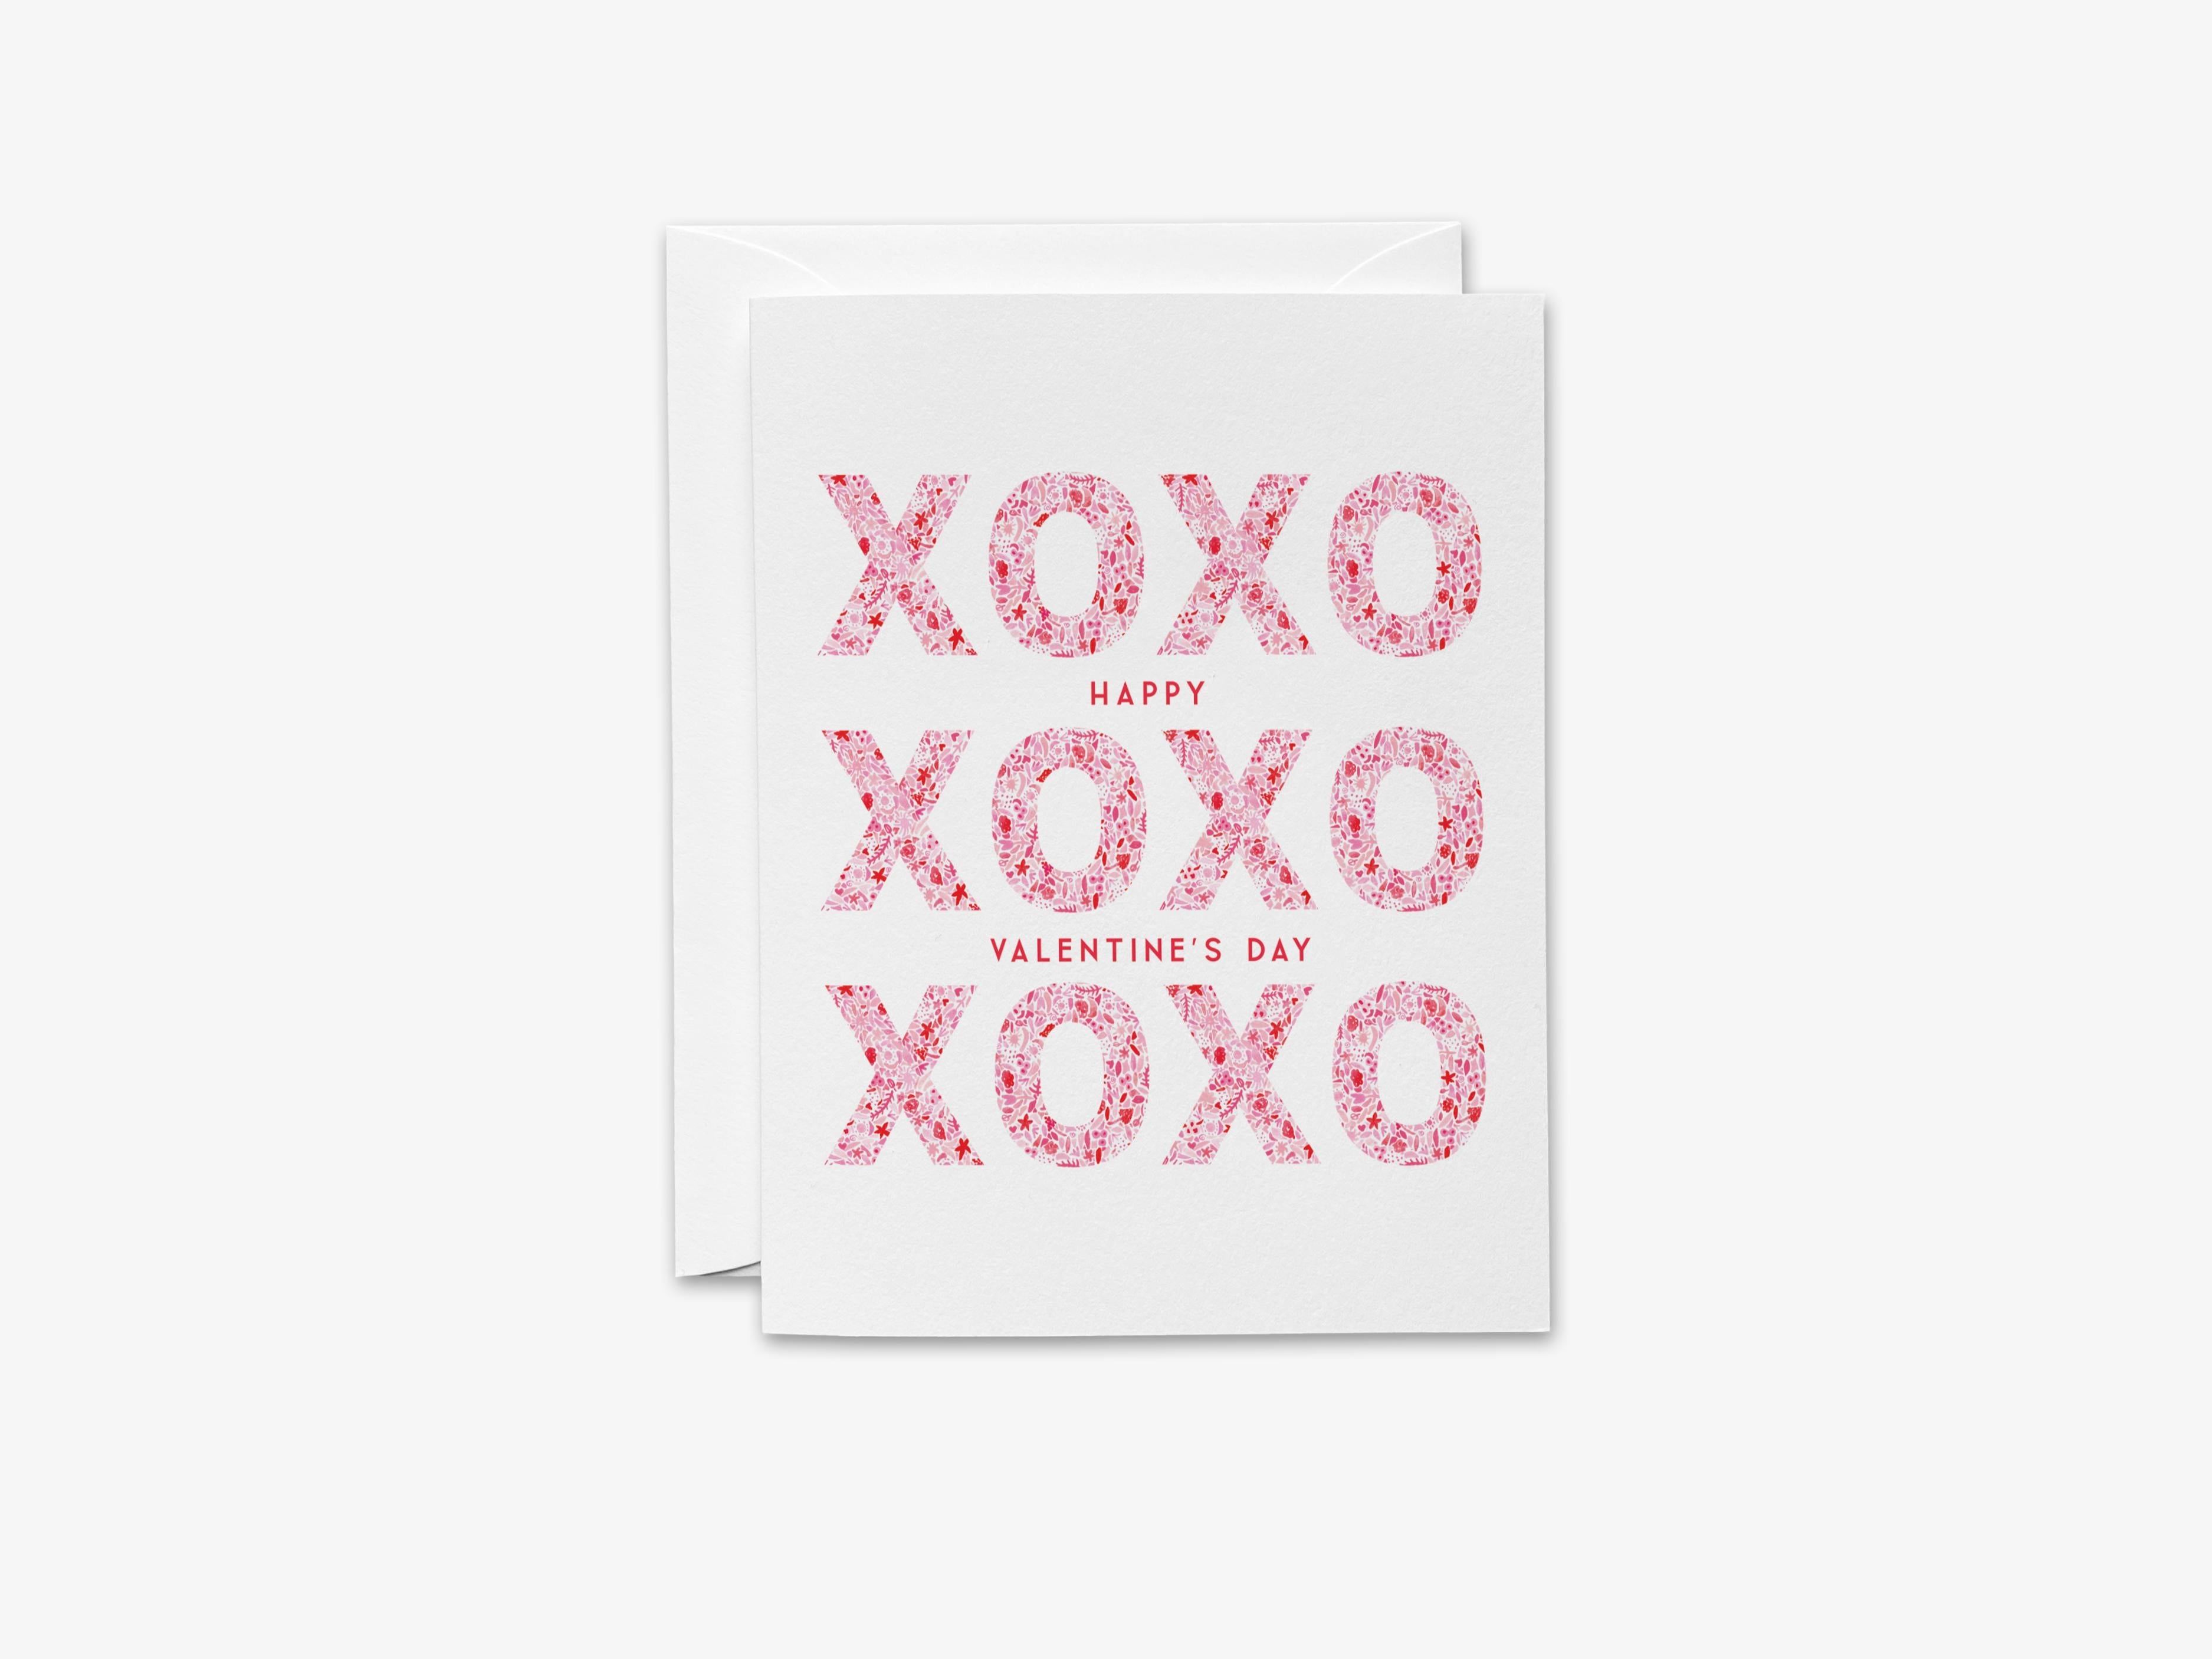 Valentine's XOXO Greeting Card-These folded greeting cards are 4.25x5.5 and feature our hand-painted pink and red pattern xoxo, printed in the USA on 100lb textured stock. They come with a White envelope and make a great Valentine's Day card for the special someone in your life.-The Singing Little Bird